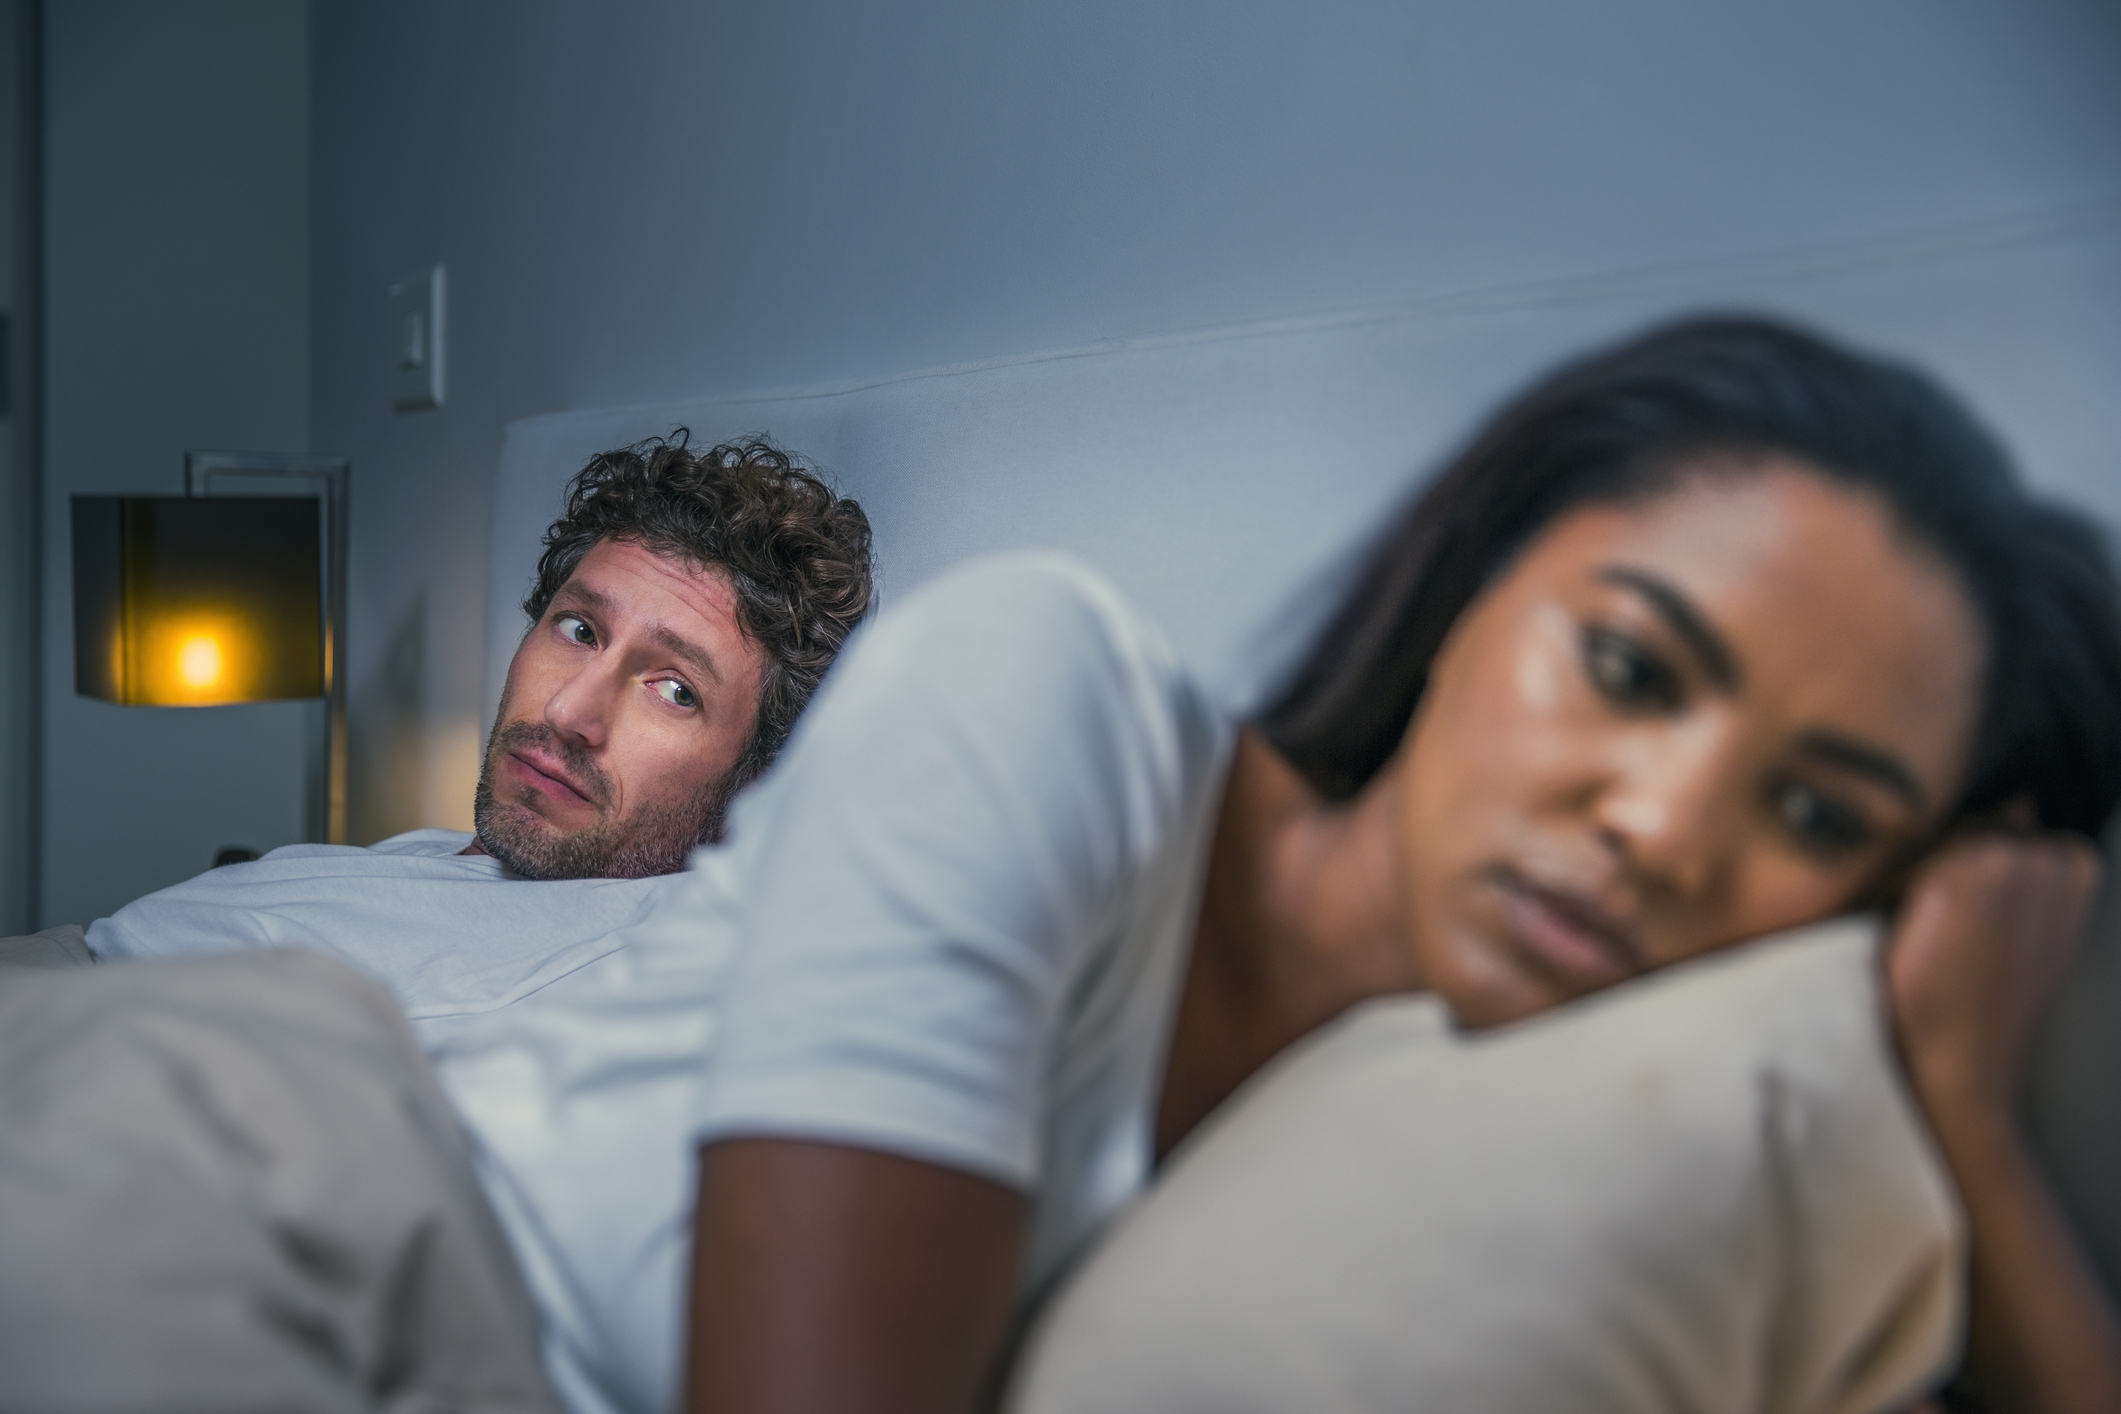 A couple in bed looking away from each other, appearing upset and distant